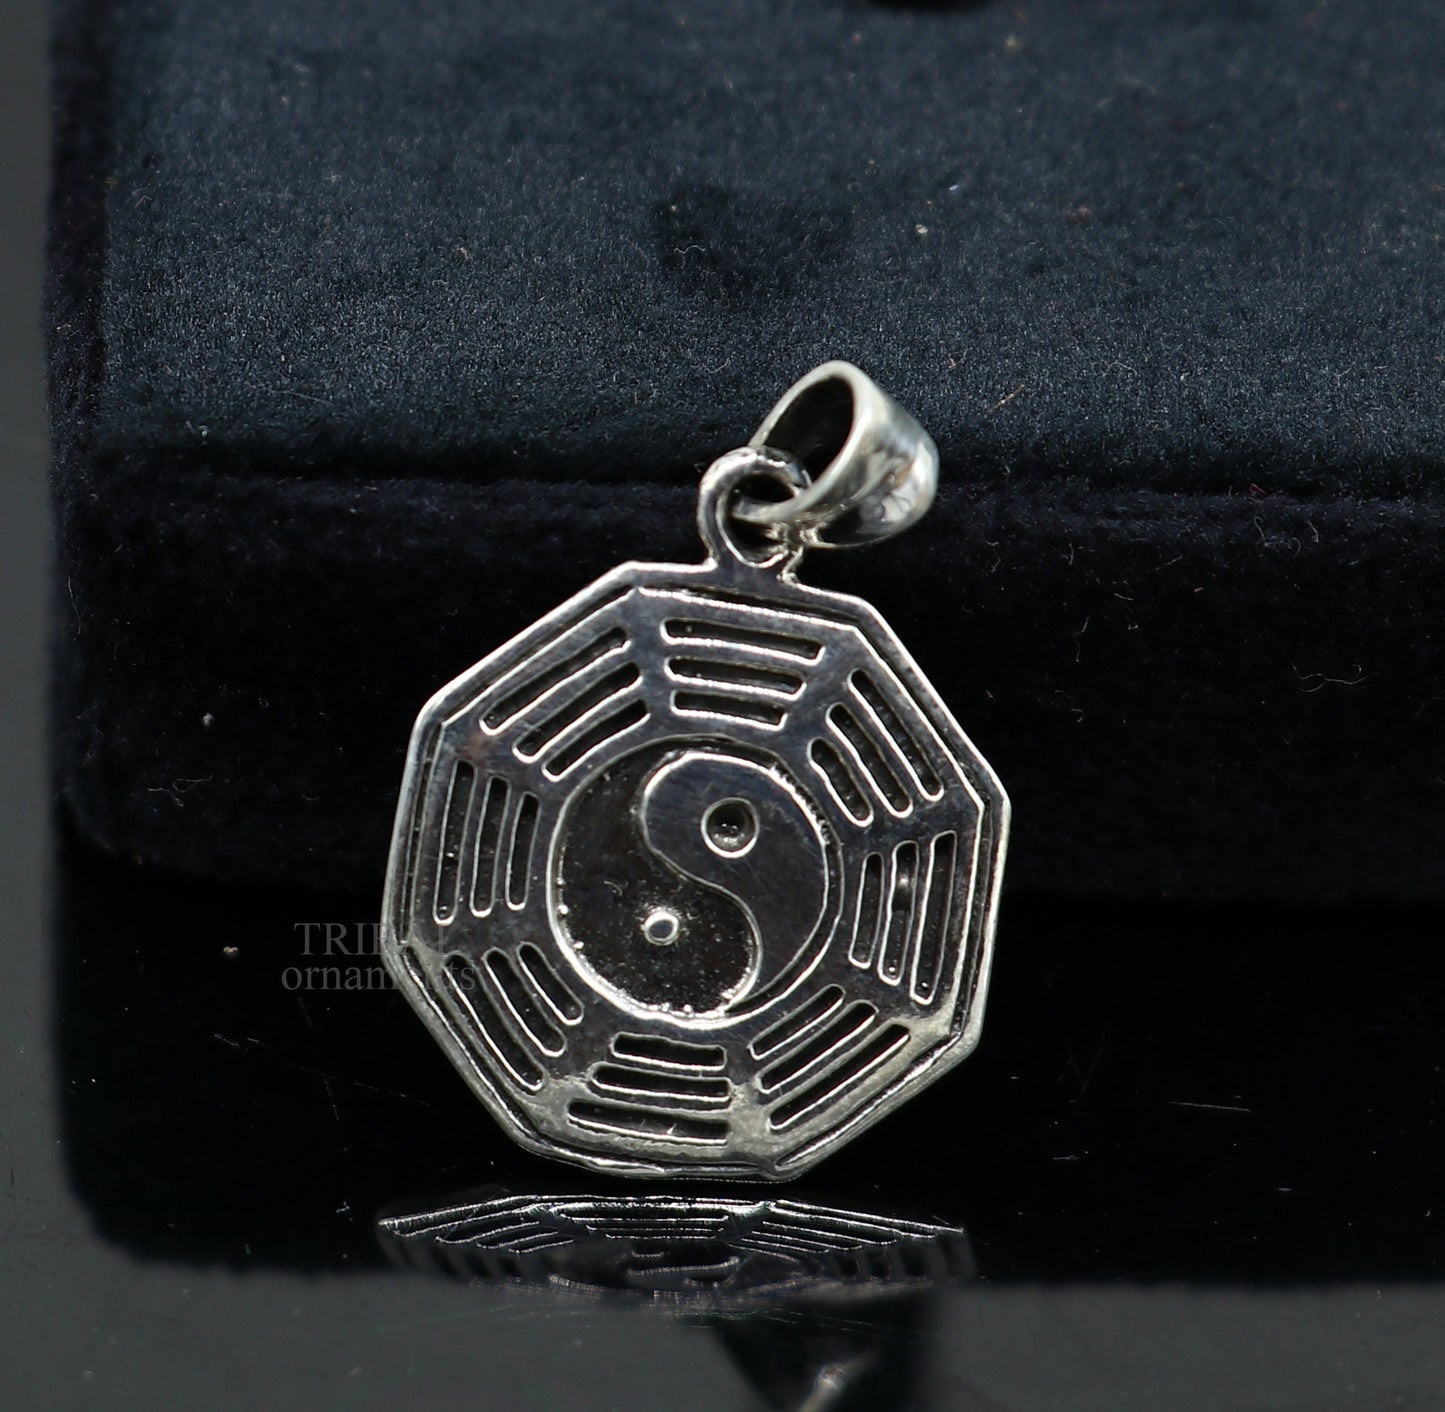 Exclusive design solid 925 sterling silver excellent unique design stylish unisex personalized gift pendant jewelry ssp1641 - TRIBAL ORNAMENTS